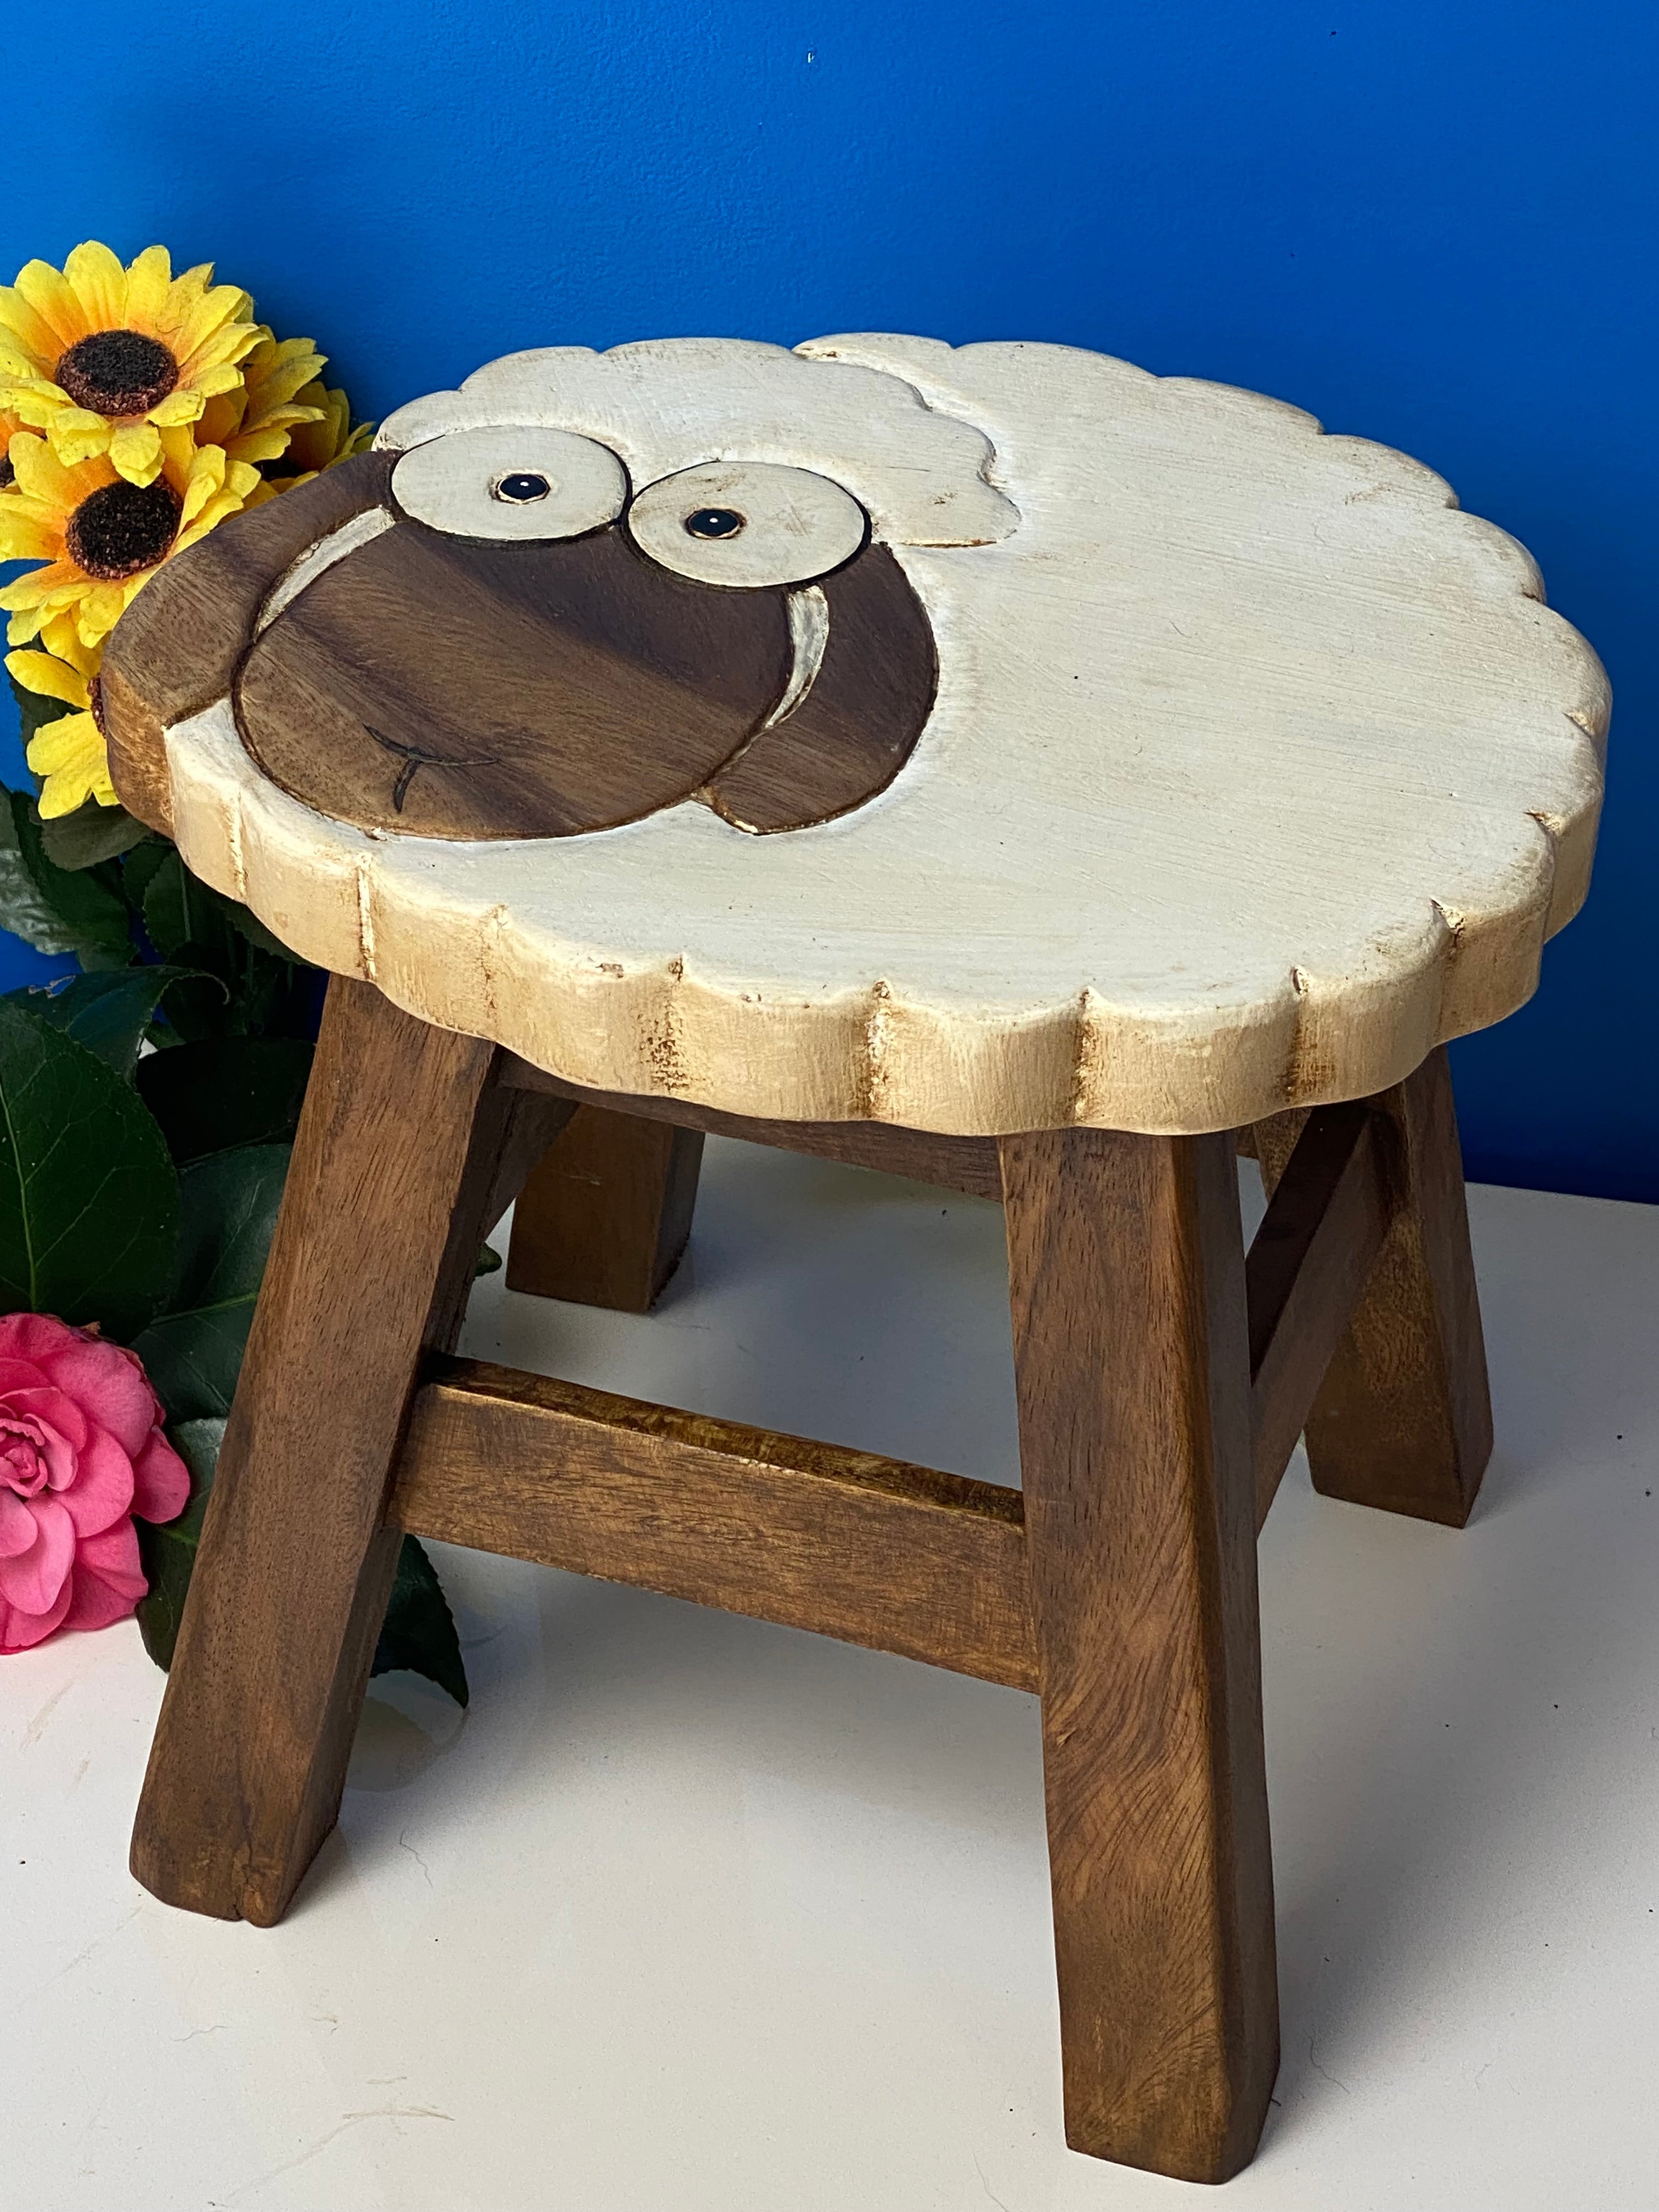 Kids Chair Wooden Stool Animal SHEEP Theme Children’s Chair and Toddlers Stepping Stool.